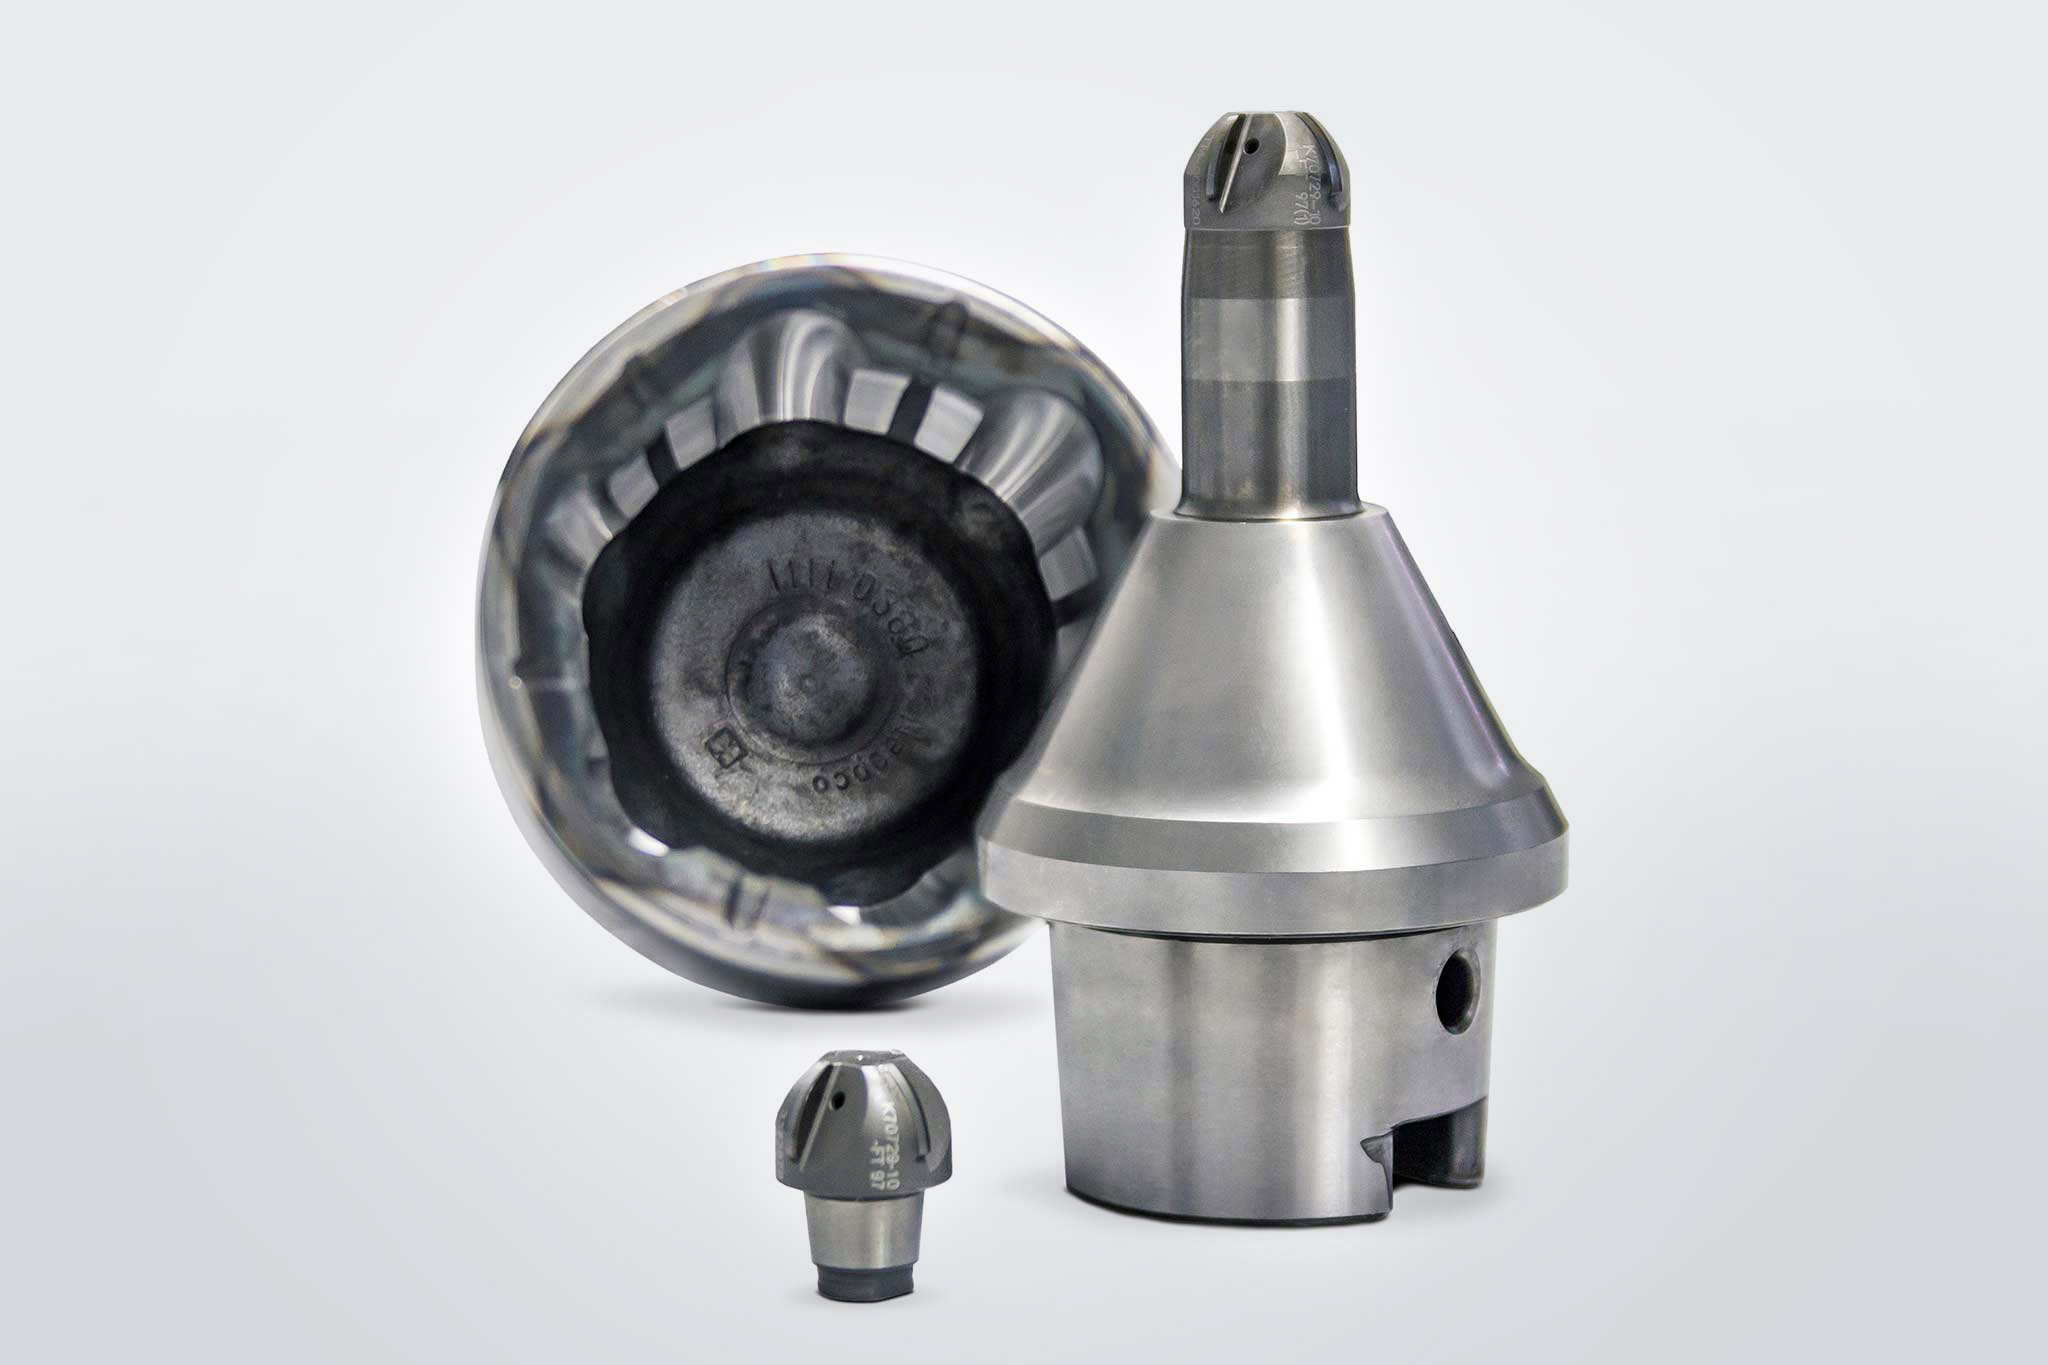 One ball cutter head and one ball nose milling cutter with tool holder and connection. The spherical shell is in the background. 